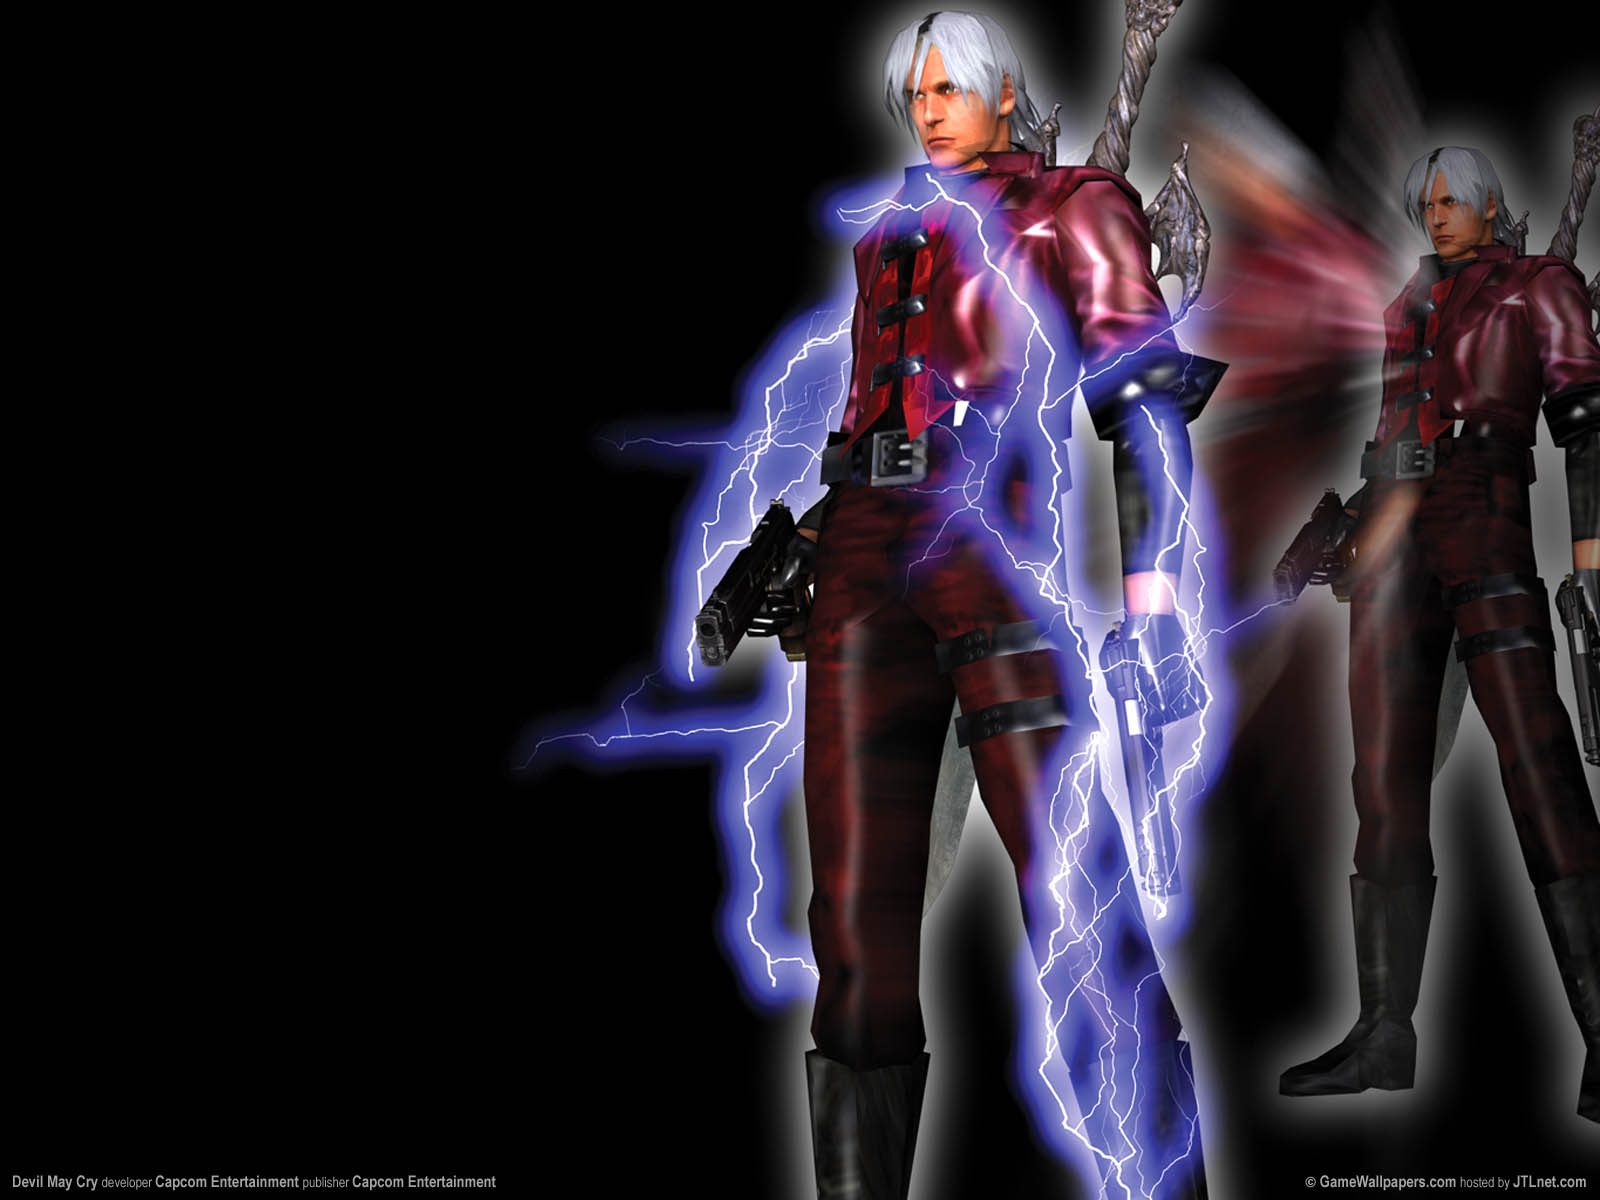 Devil May Cry achtergrond 03 1600x1200